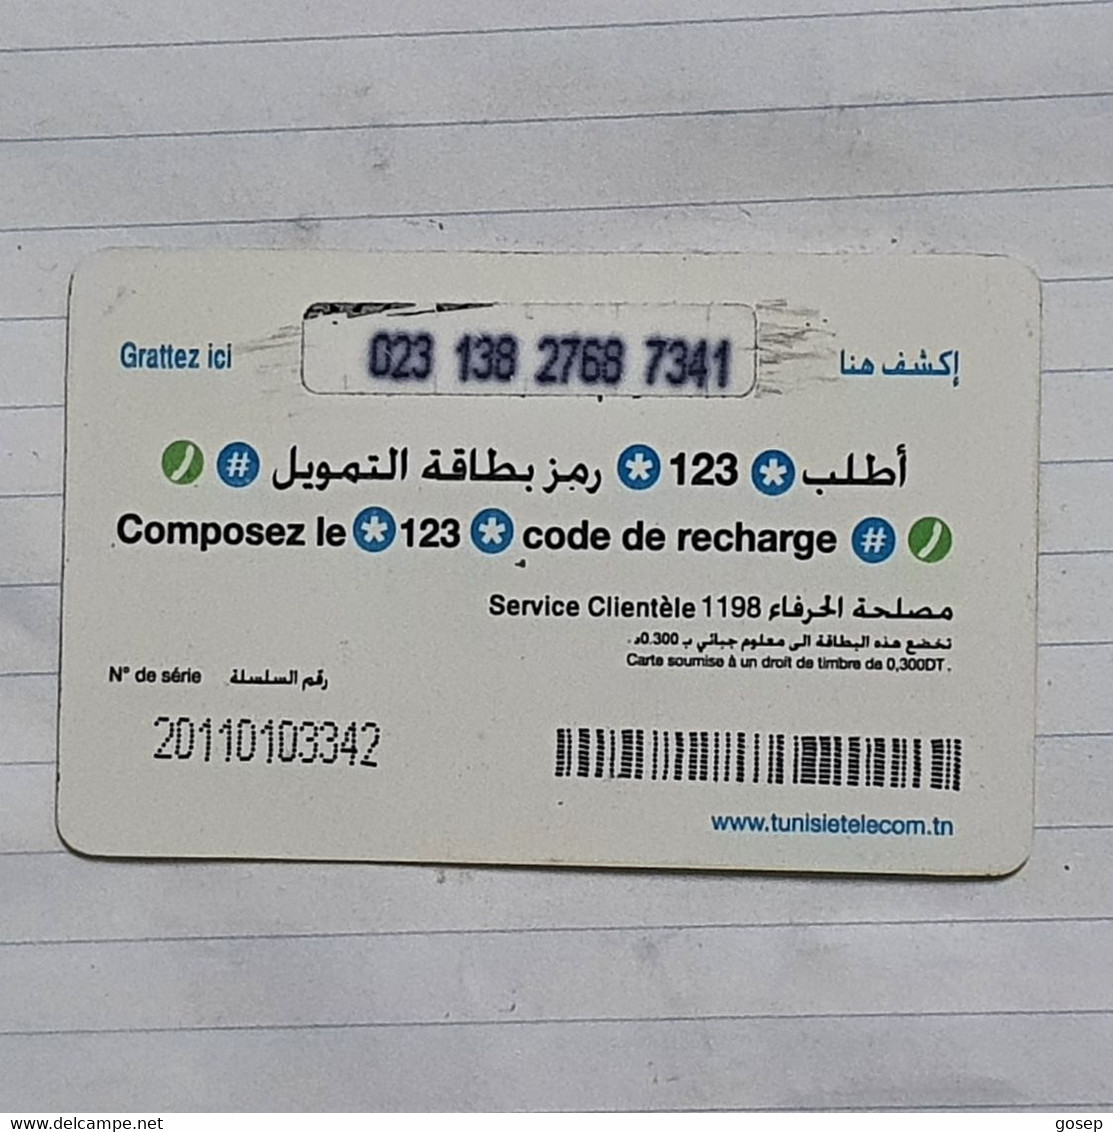 TUNISIA-(TN-TTL-REF-0032A)-GIRL1-(97)-(023-138-2768-7341)-(11/98)-(look From Out Side Card-BARCODE)-used Card - Tunisia